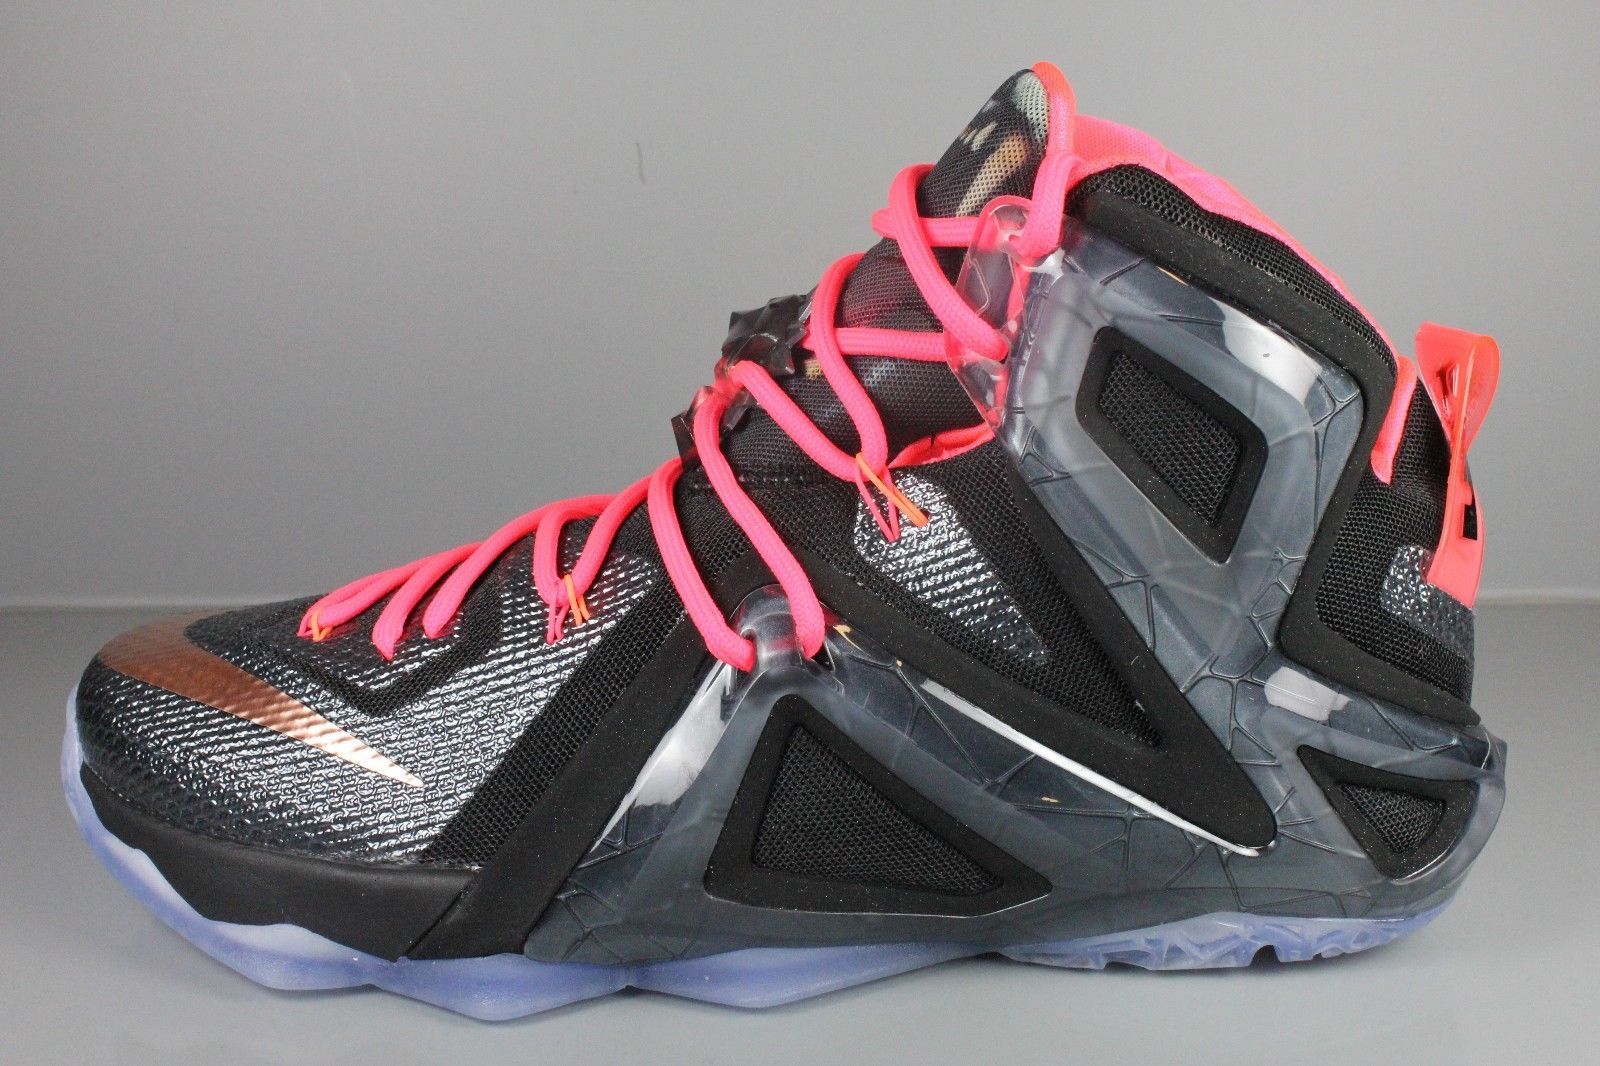 Will LeBron James Ever Wear This Nike LeBron 12 Elite? | Sole Collector